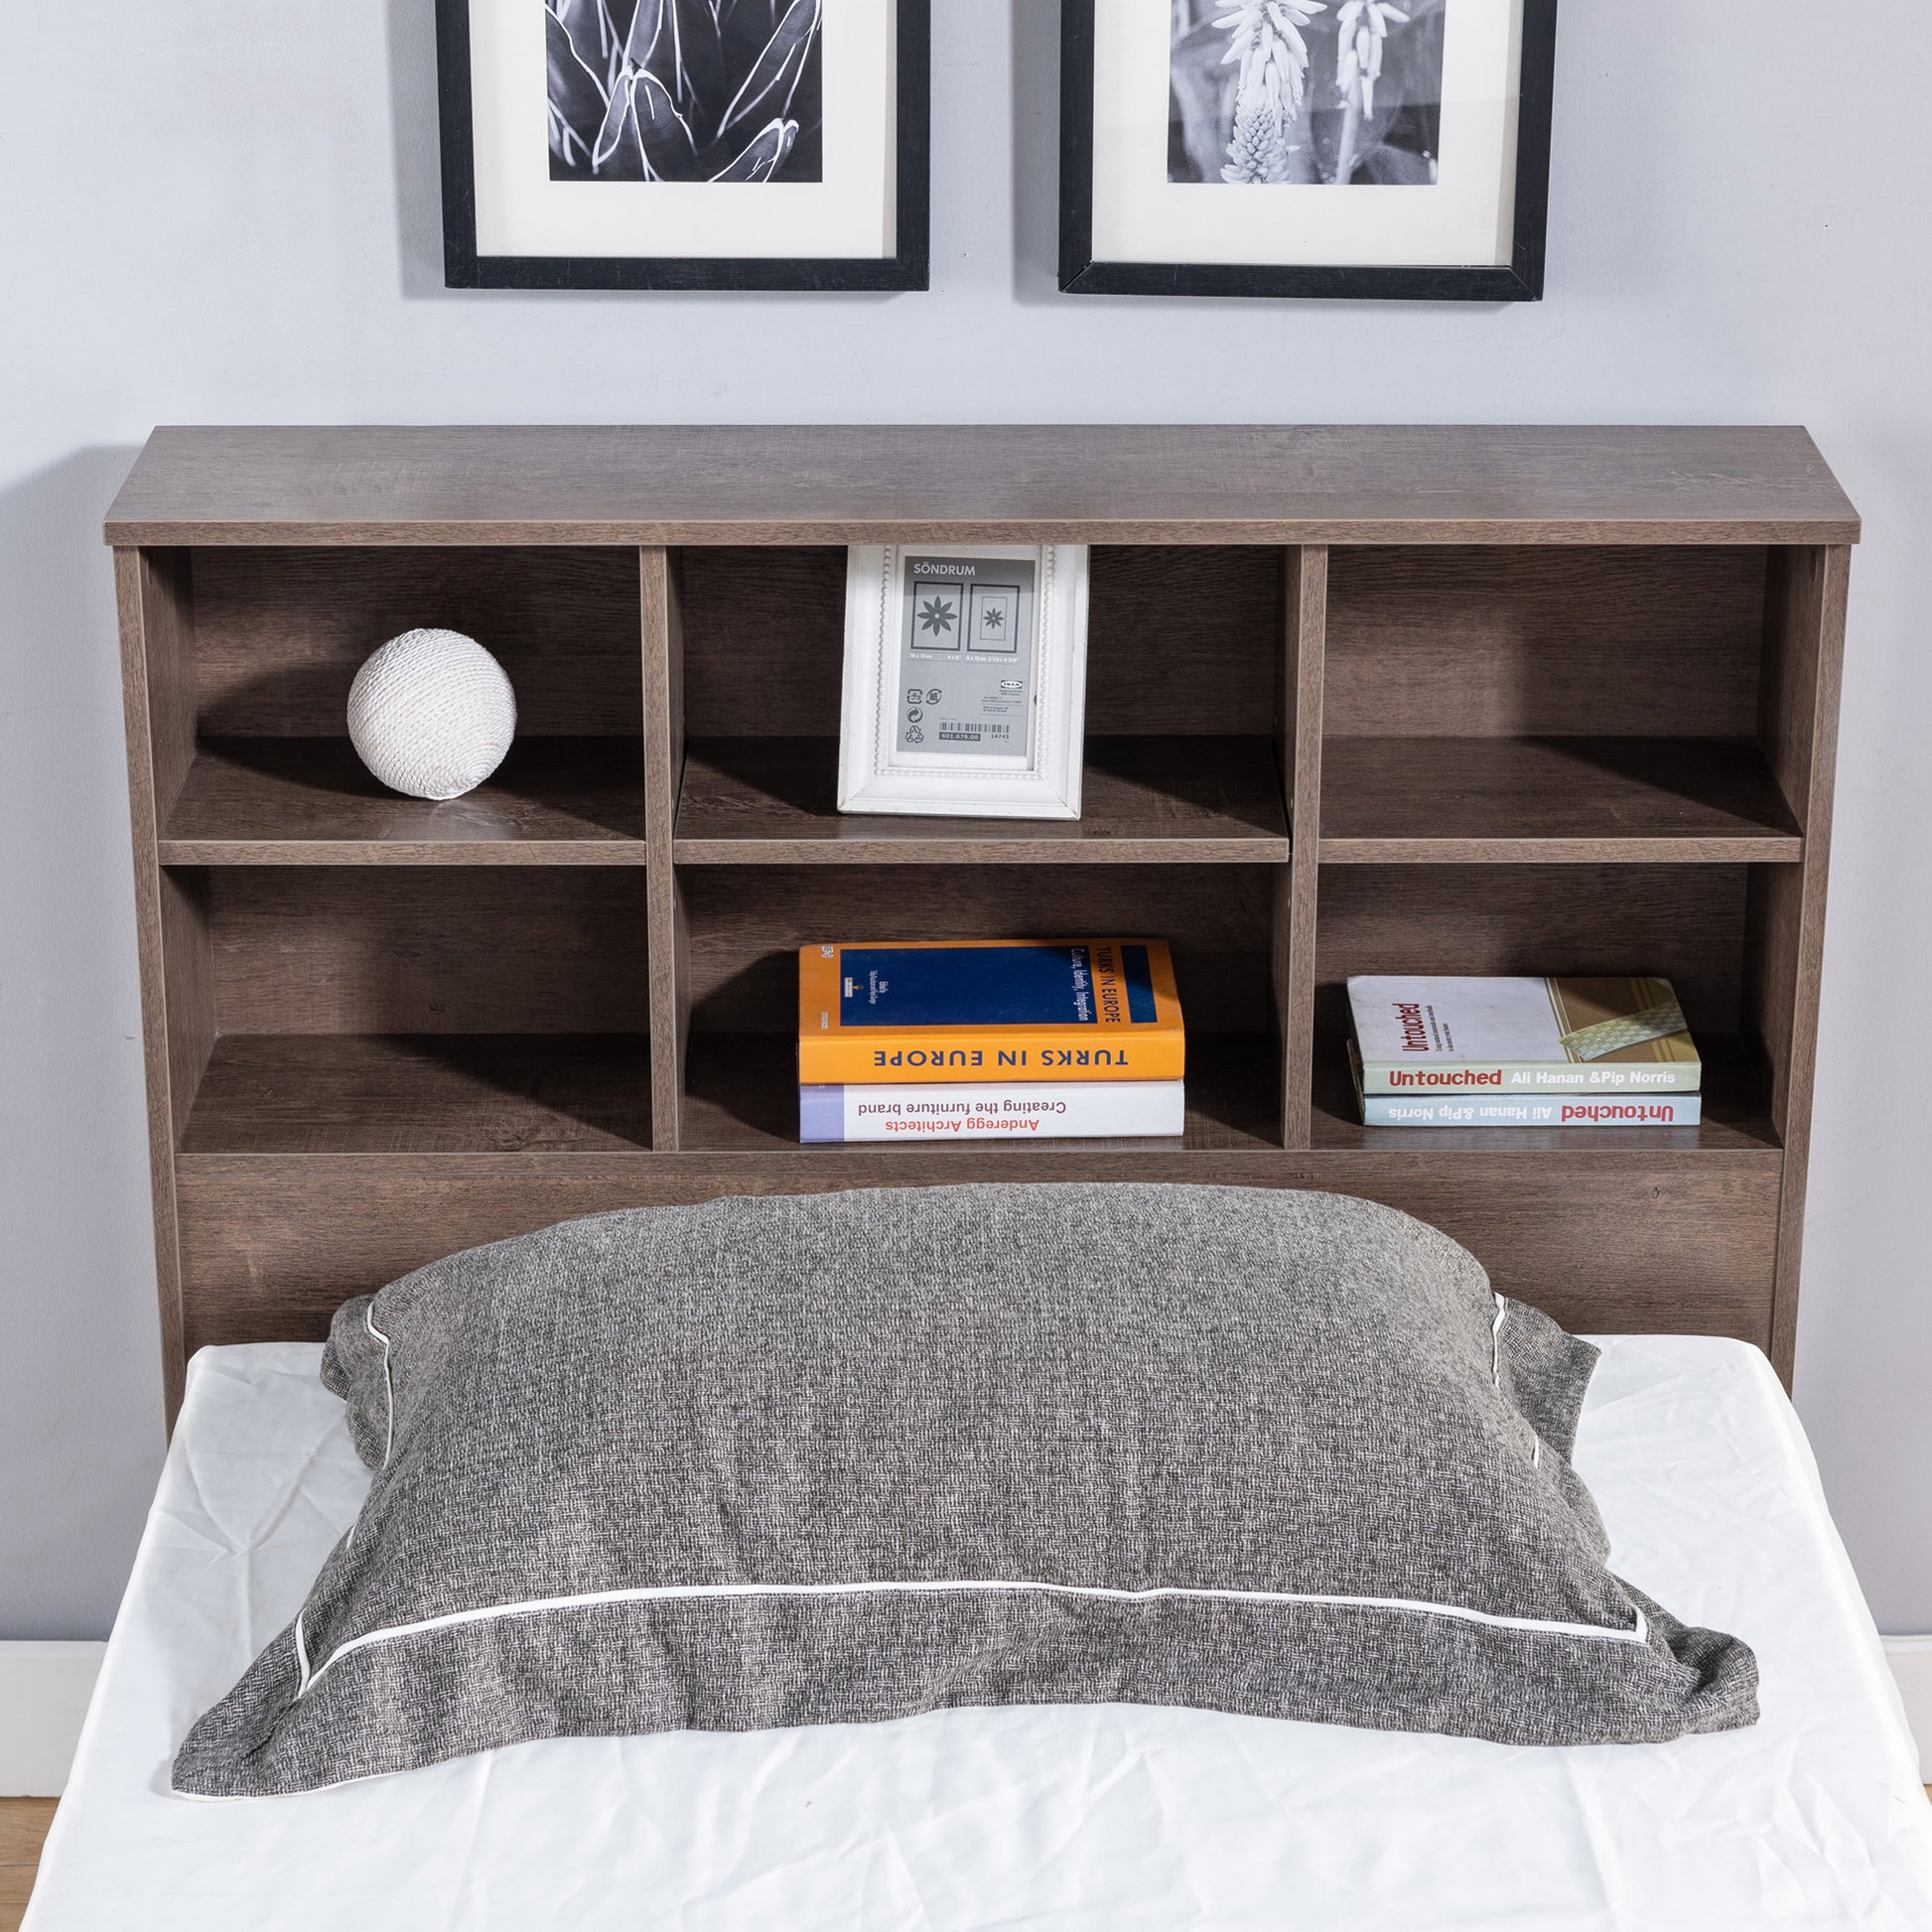 Front-facing headboard close-up of a contemporary walnut three-drawer platform storage bed with a bookcase headboard in a bedroom with accessories